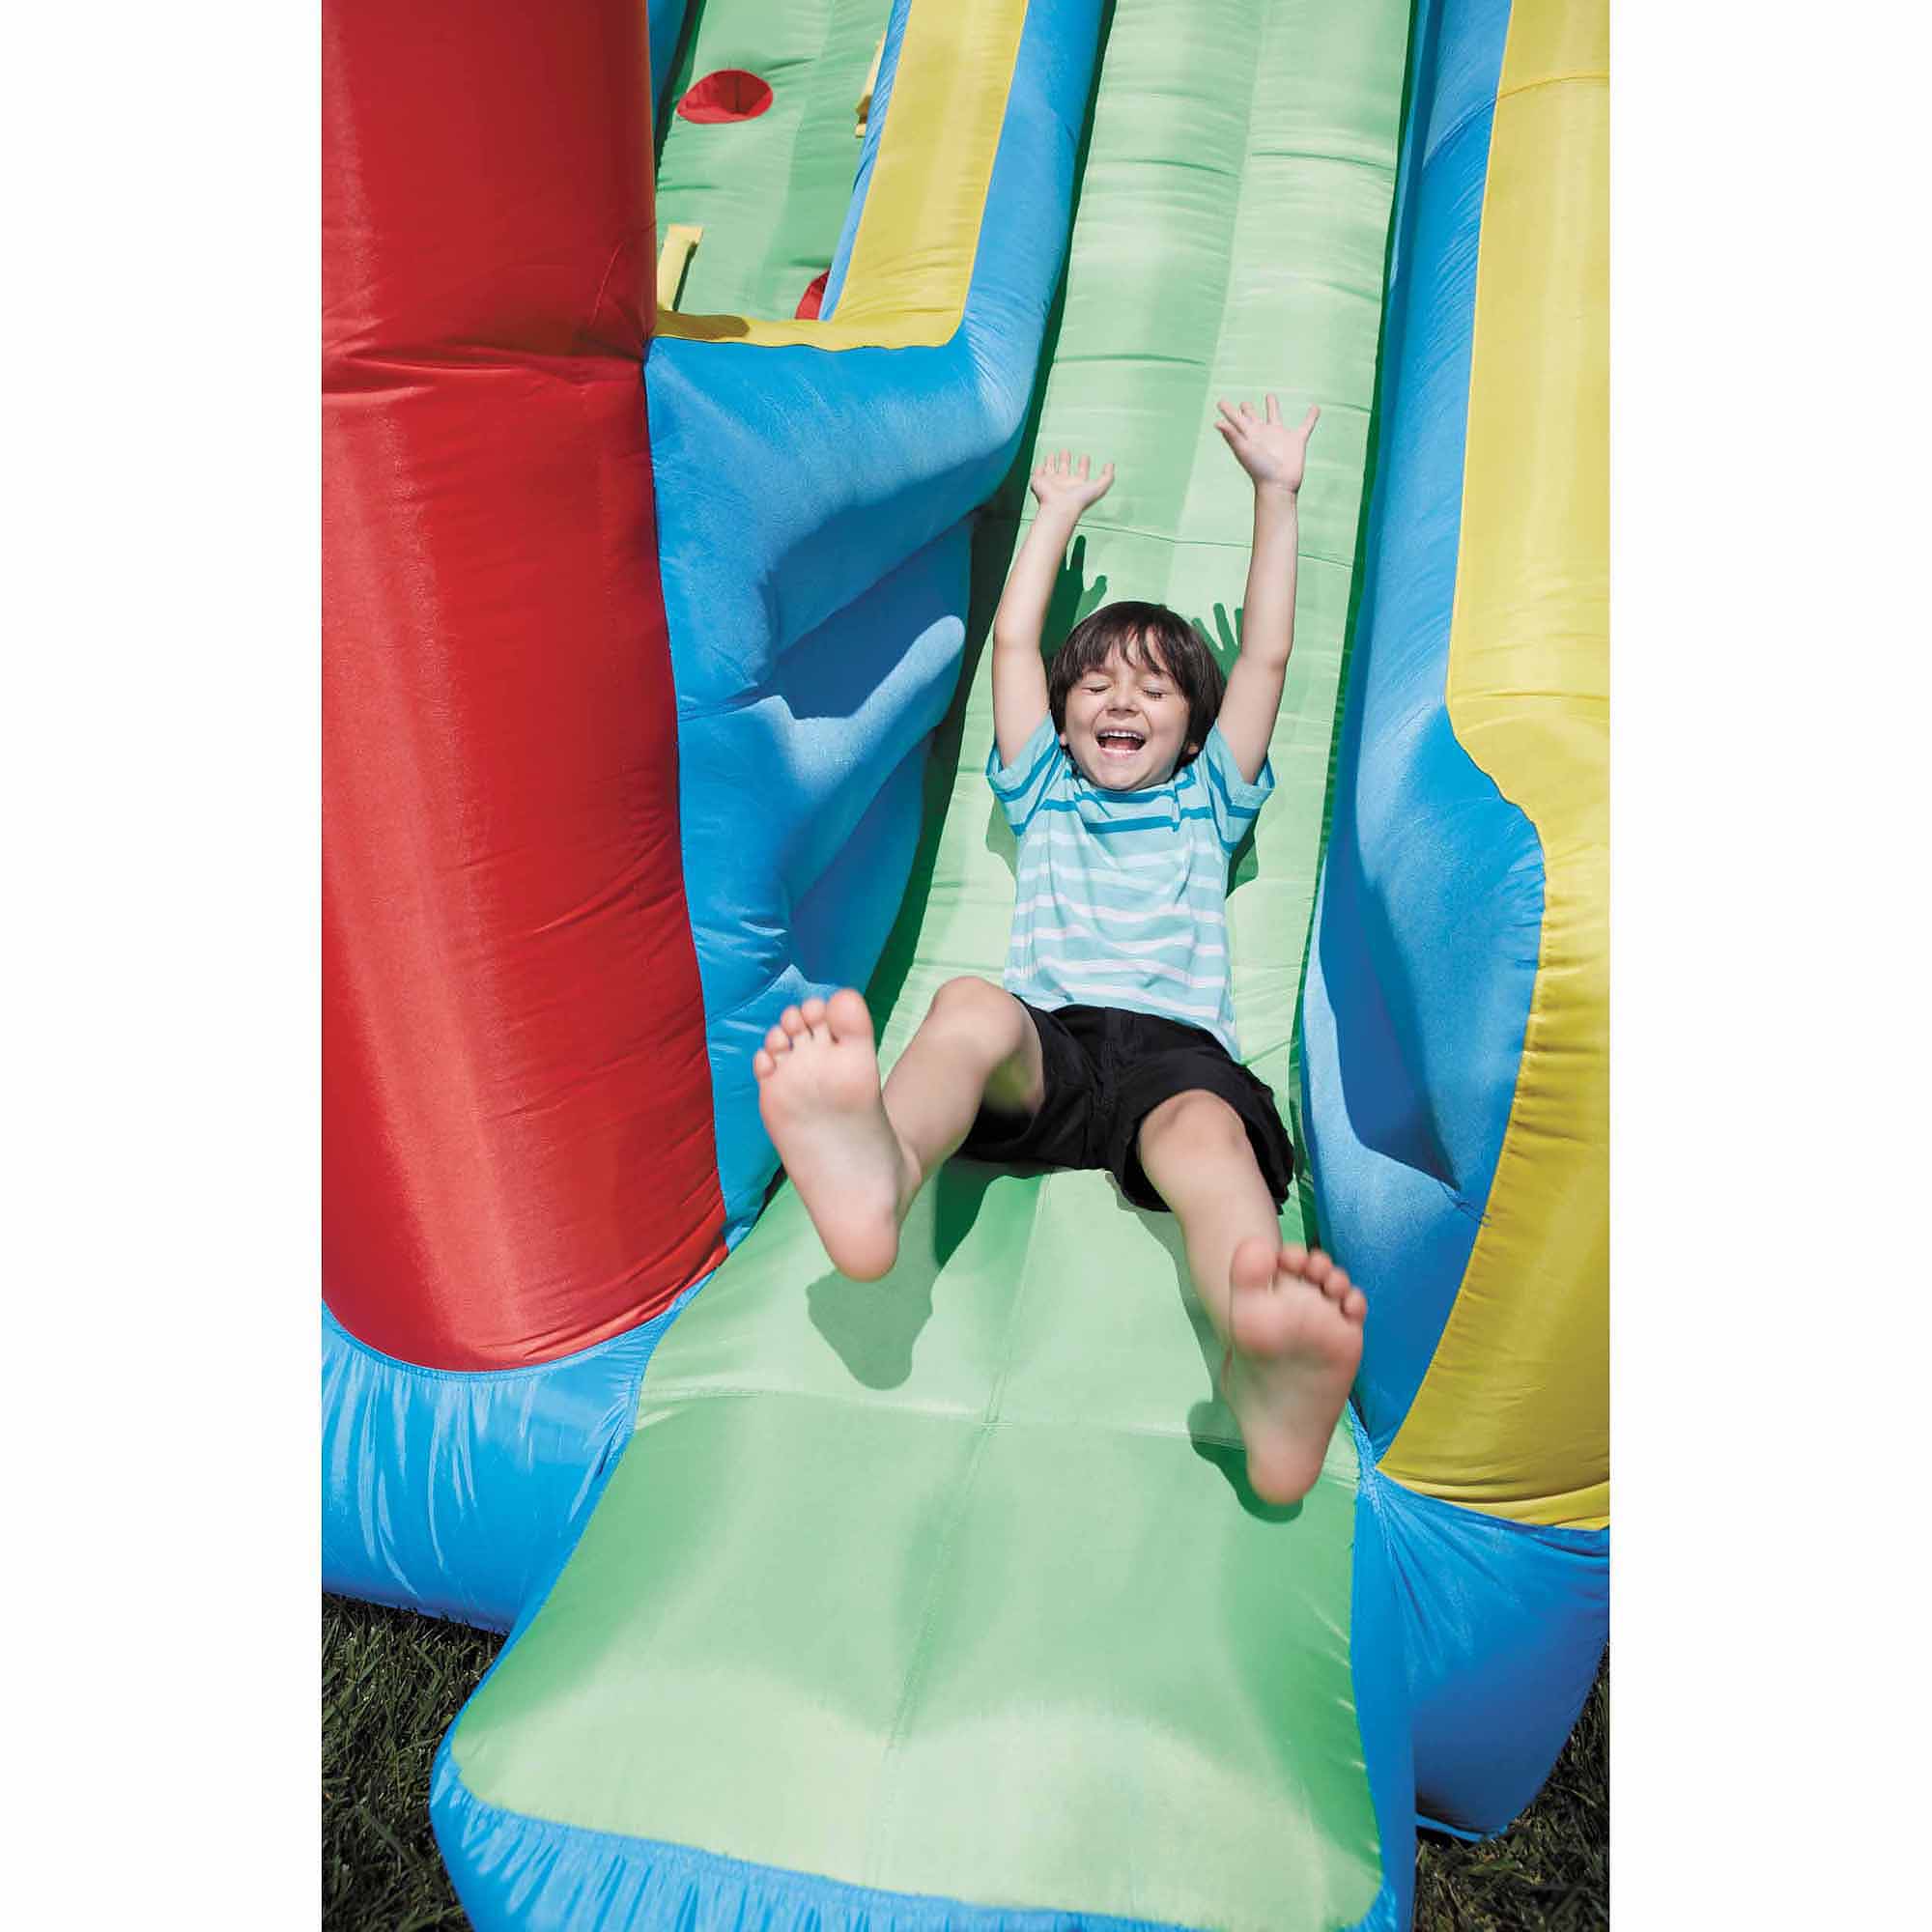 Little Tikes Giant Slide Bouncer Inflatable Bounce House with Blower and Climbing Wall, Fits up to 3 Kids, Multicolor, Outdoor Backyard Toy for Boys Girls Ages 3 4 5+ to 8 Year Old - image 4 of 6